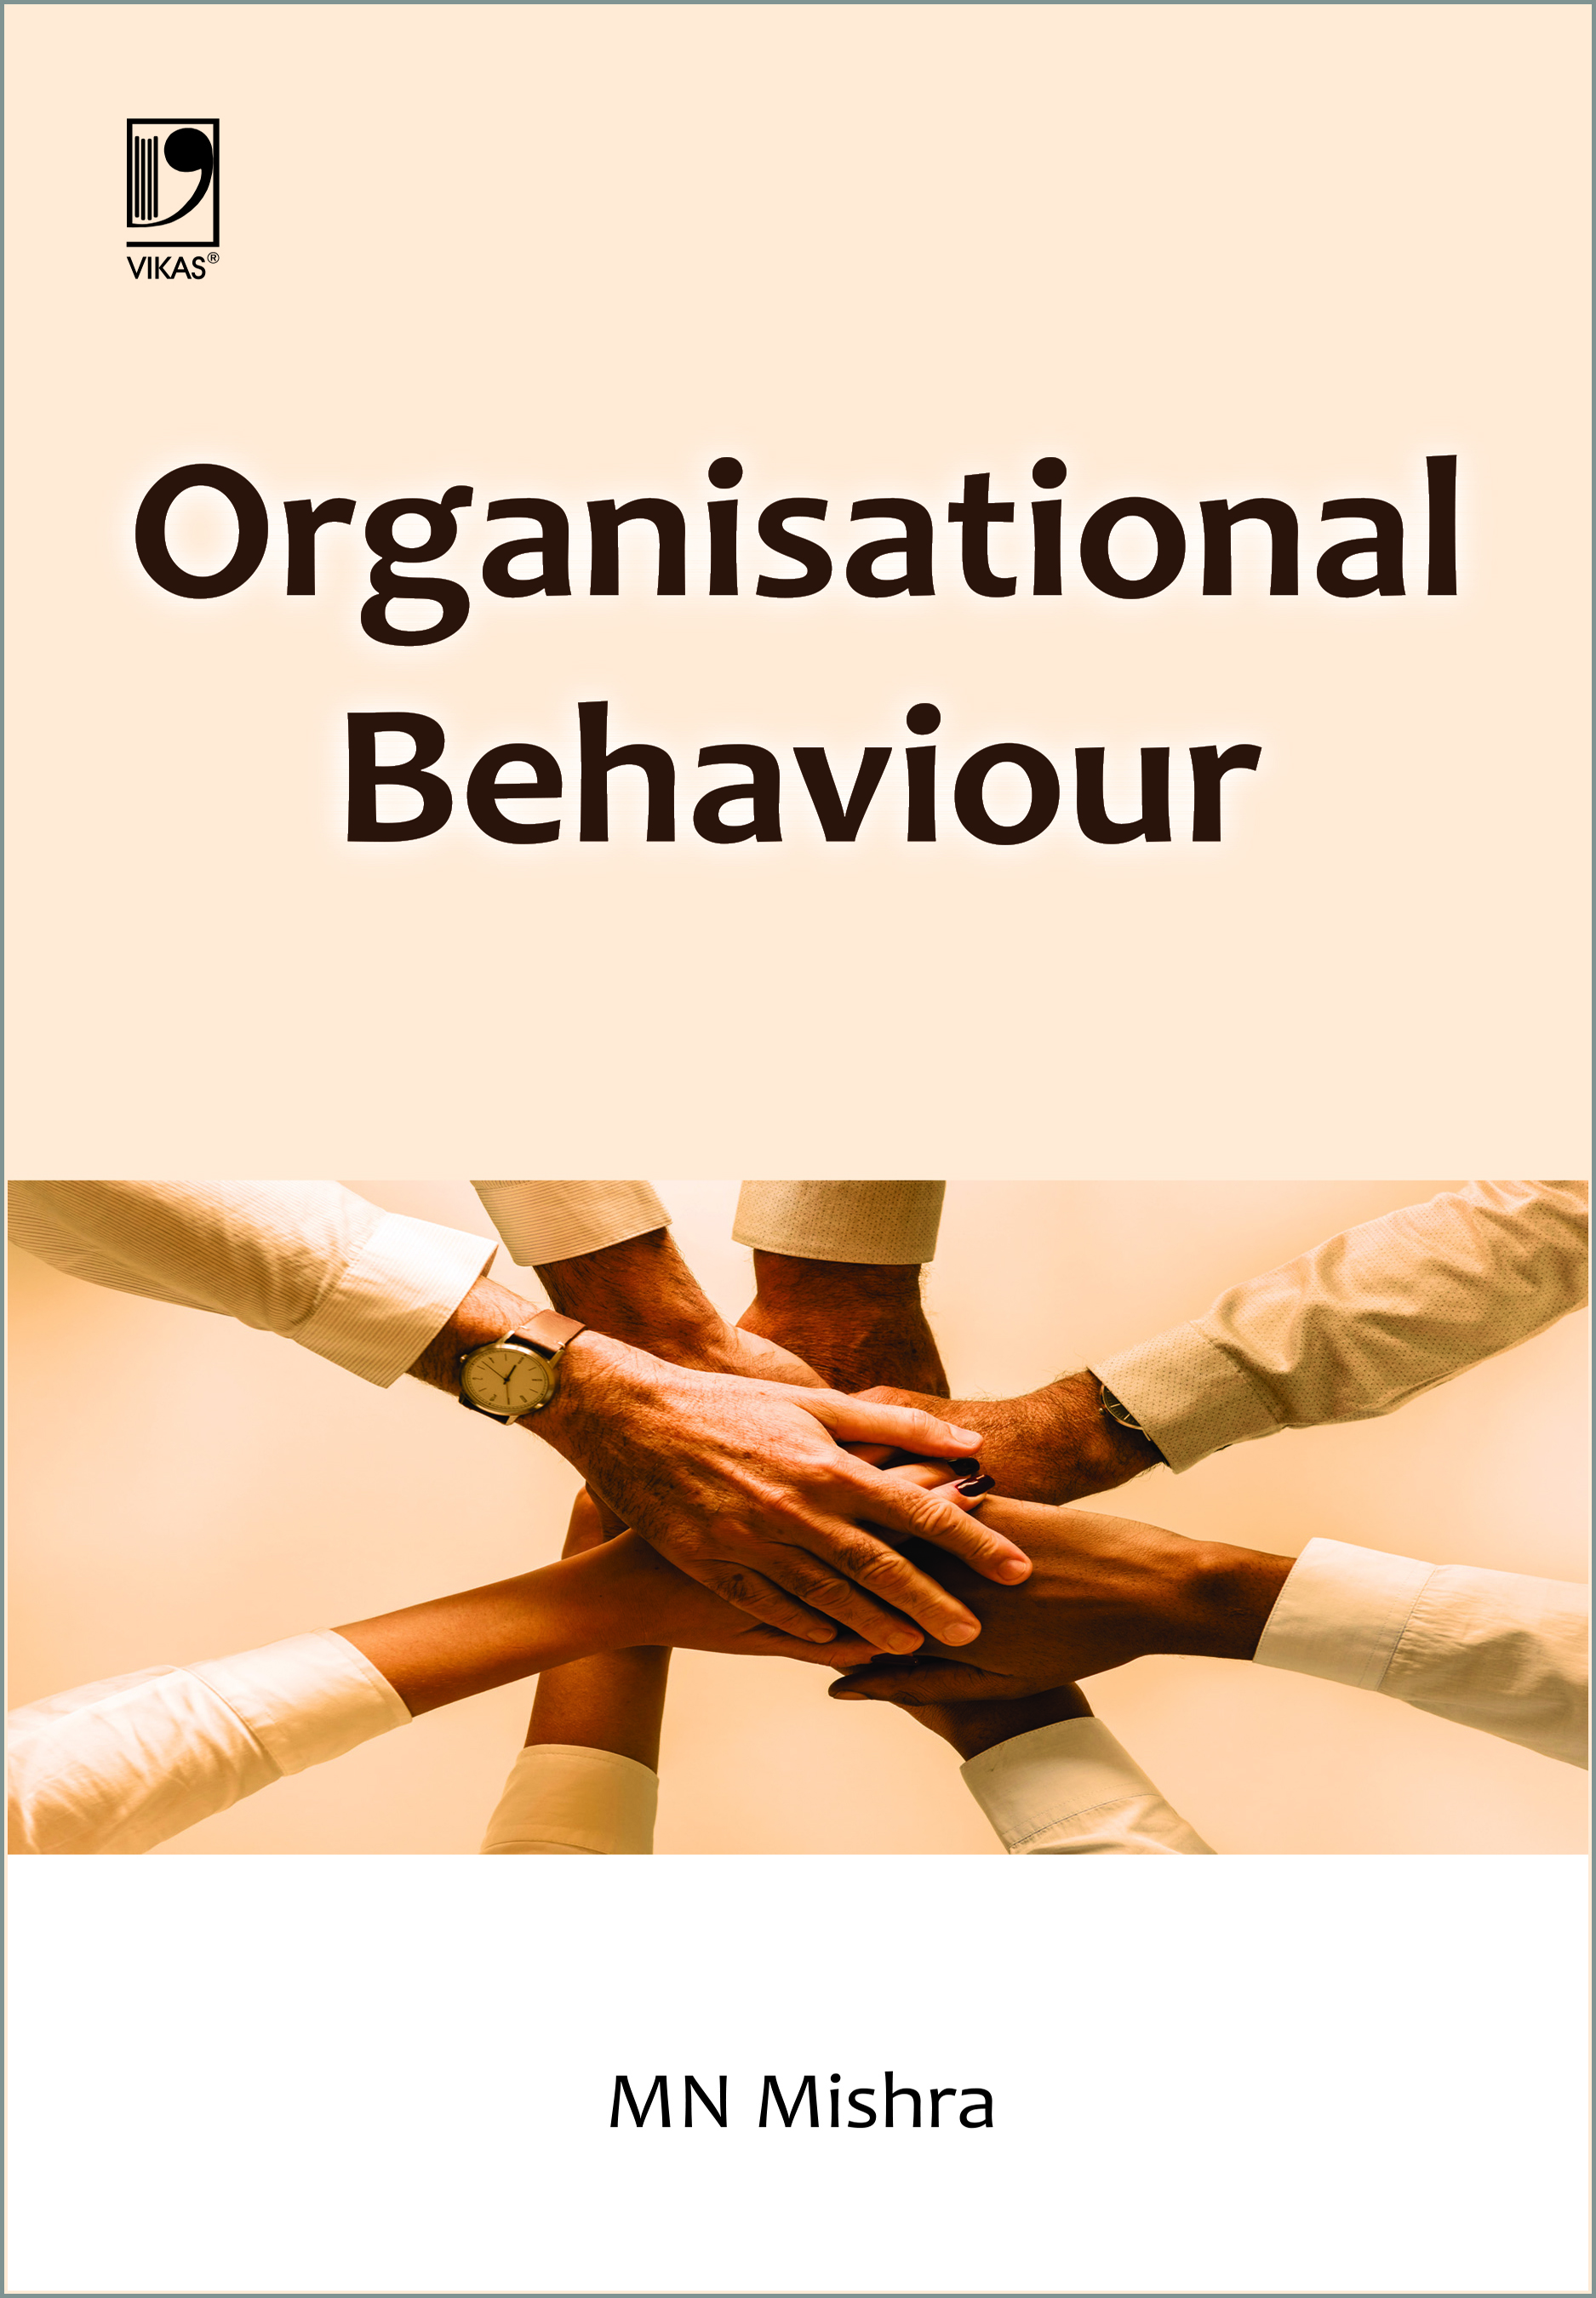 thesis related to organizational behavior